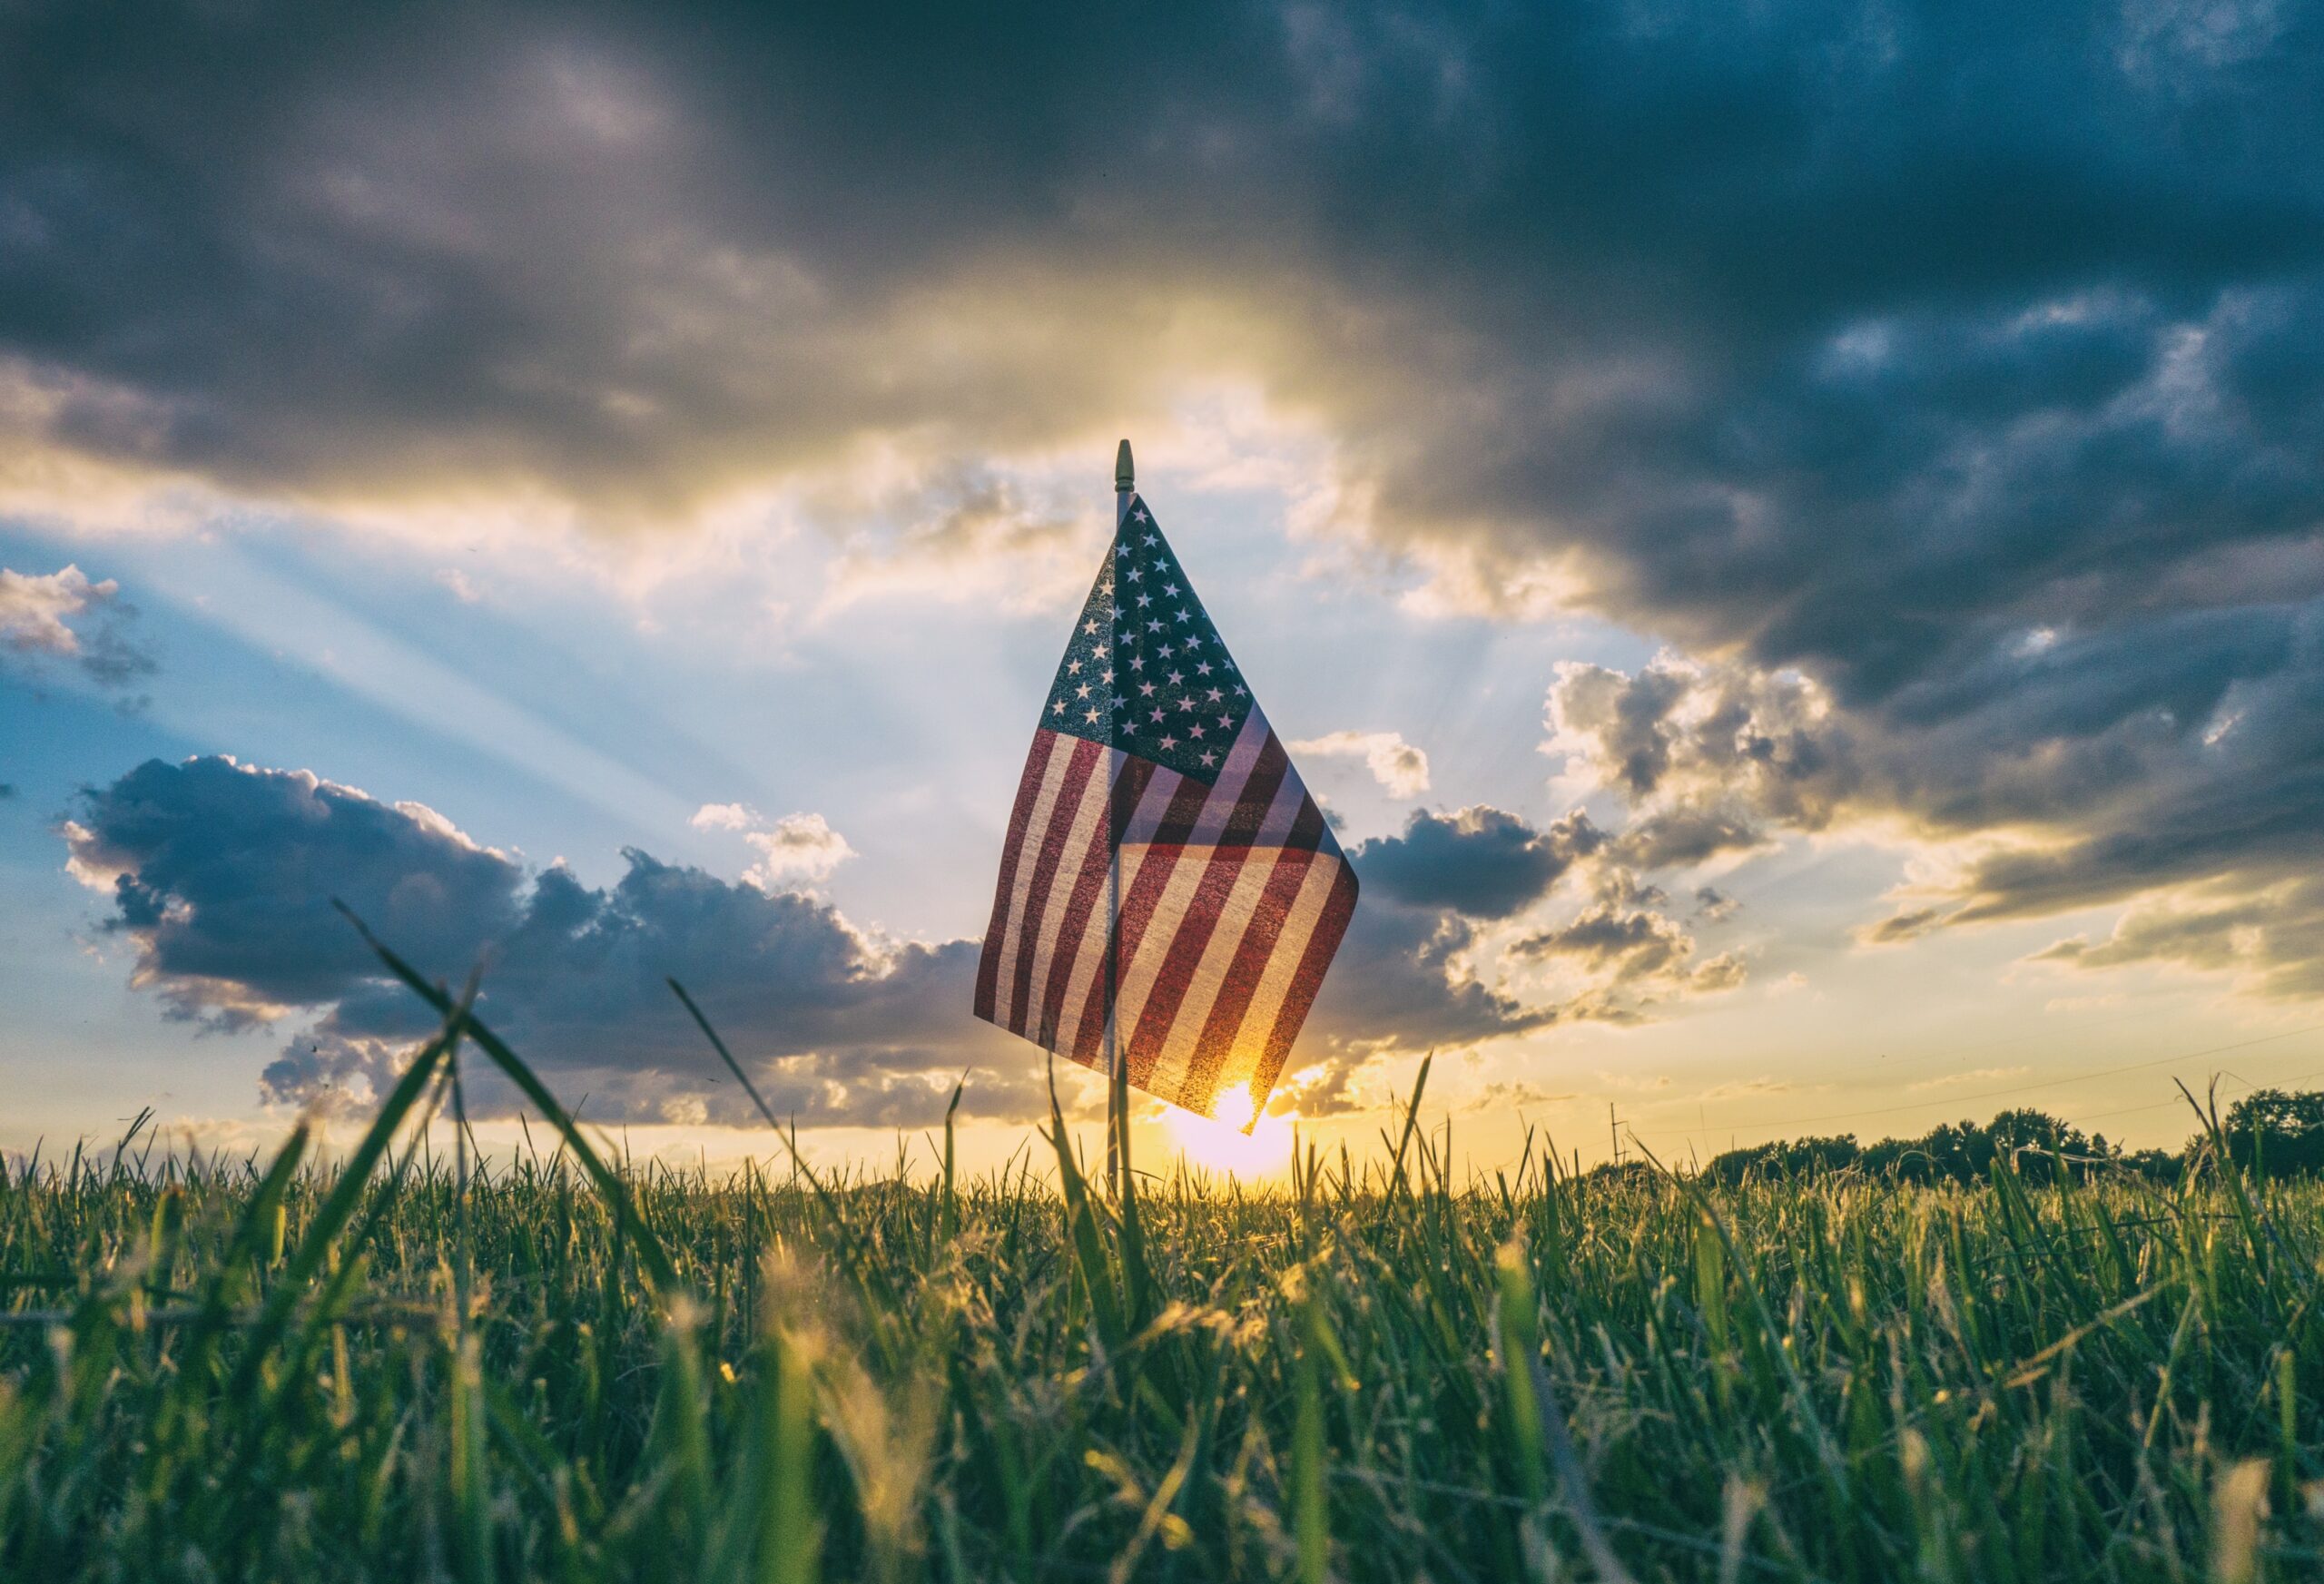 American flag with the sun behind it | Photo by Aaron Burden on Unsplash